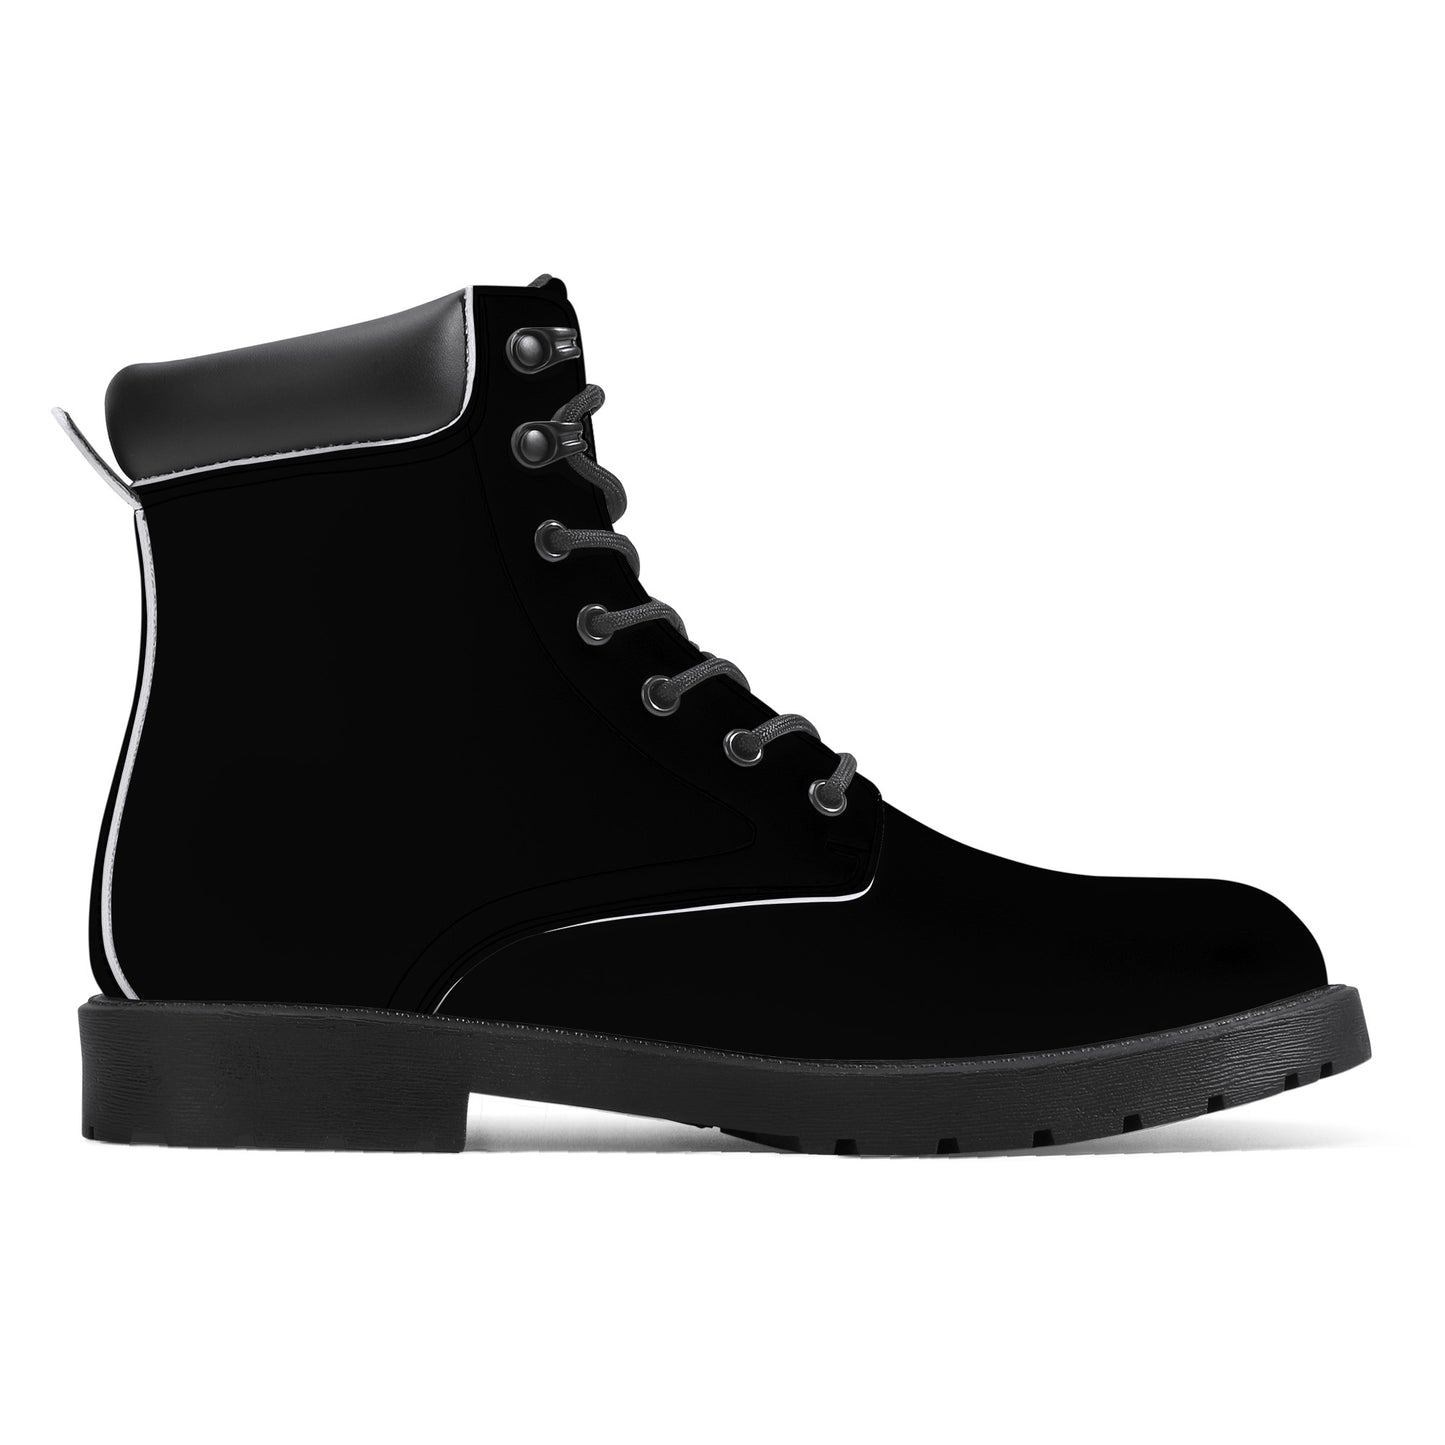 Cryptic Synthetic Leather Boots, Black